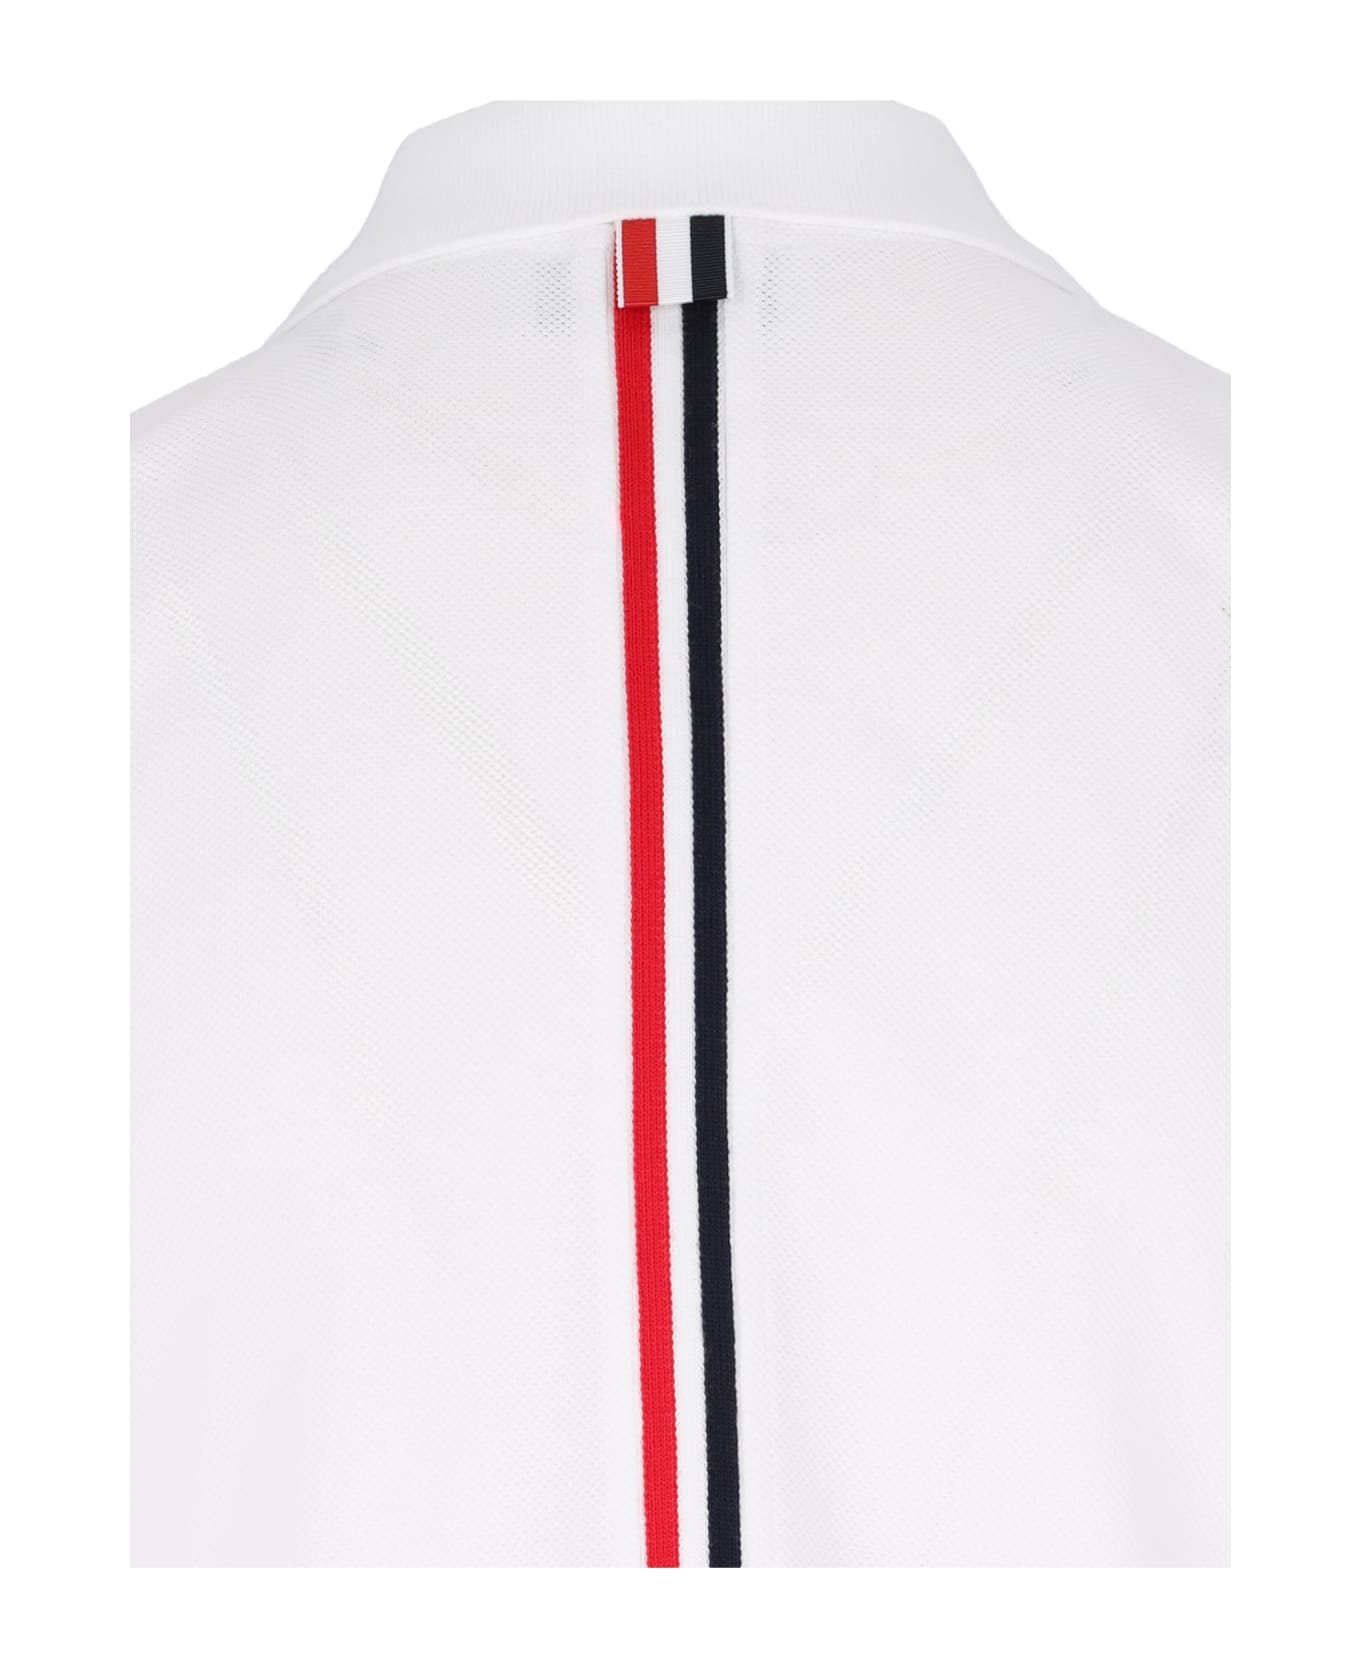 Thom Browne Polo Shirt With Tricolor Detail On The Back - White